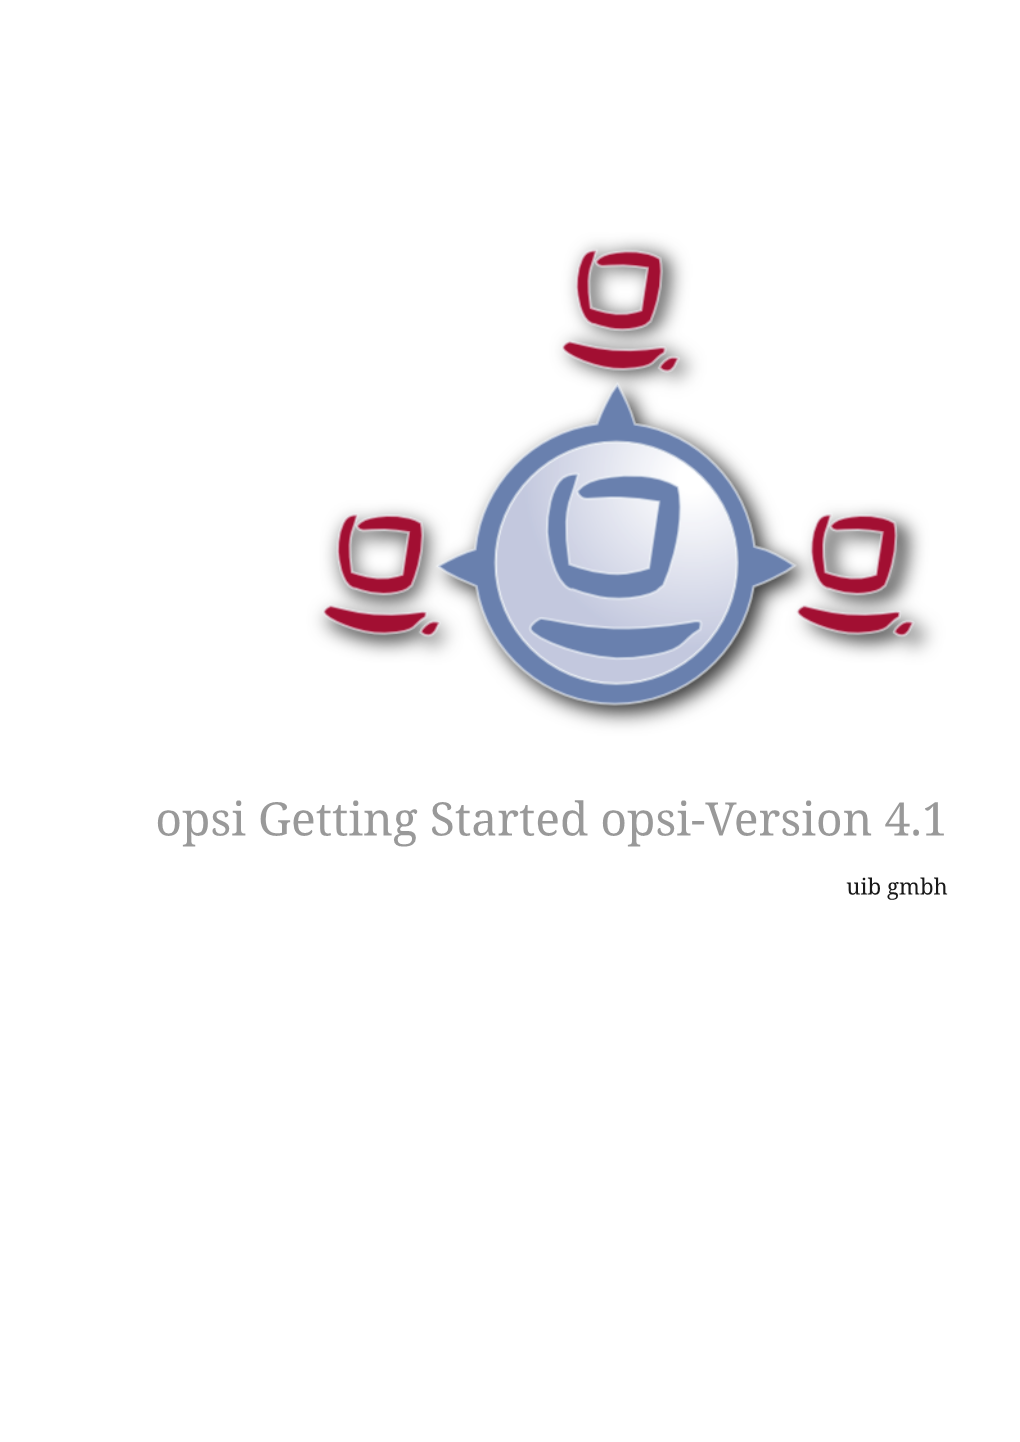 Opsi Getting Started Opsi-Version 4.1